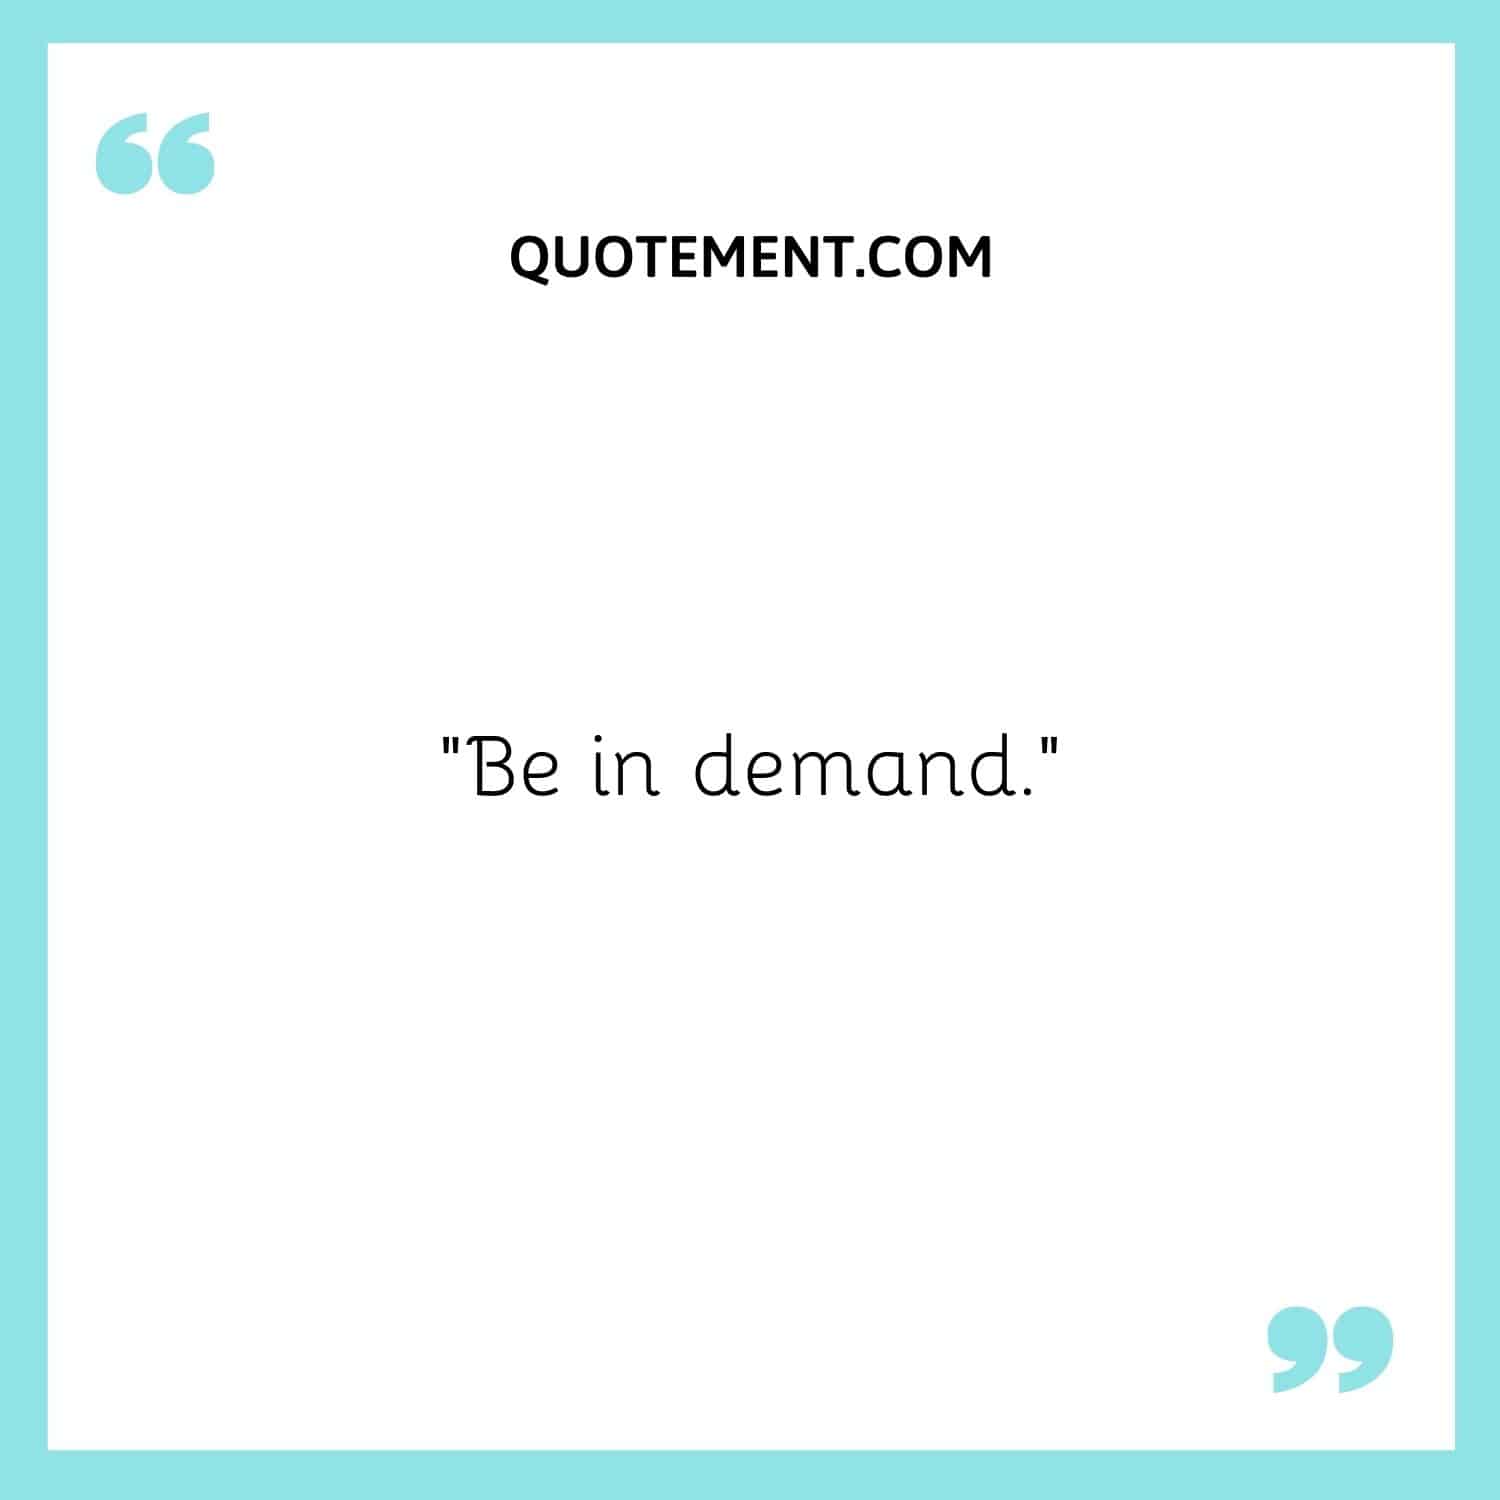 Be in demand.